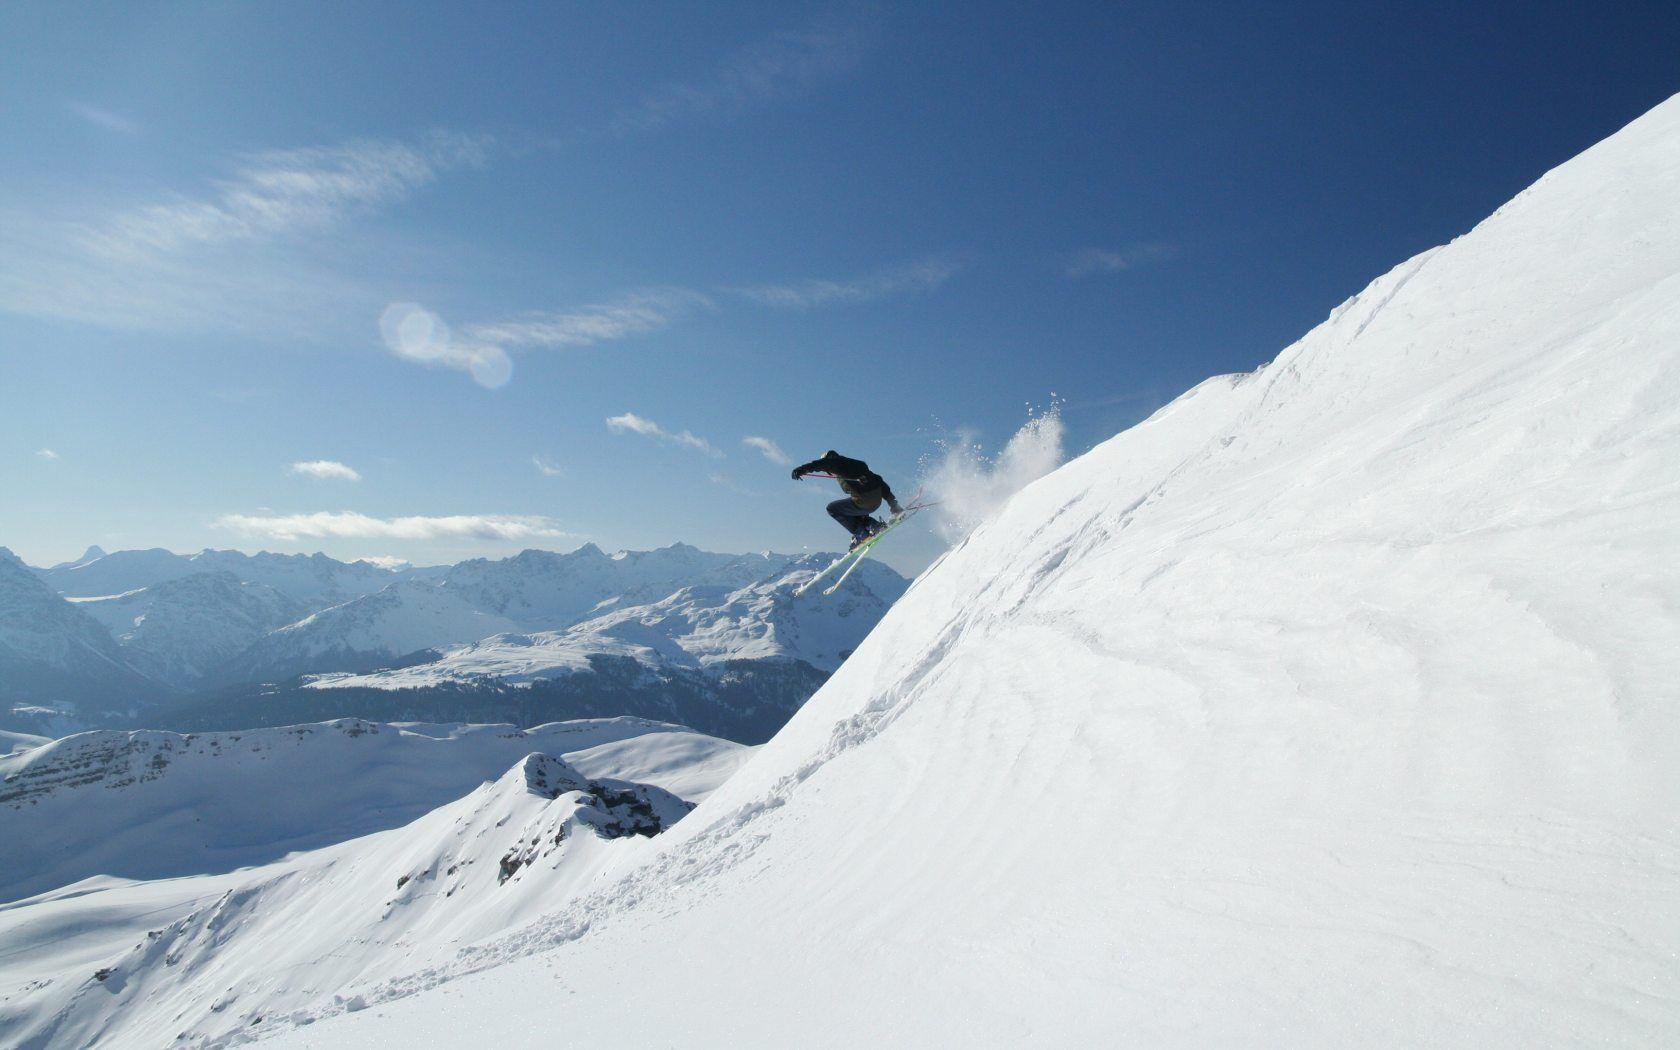 Skiing HD Wallpaper and Background